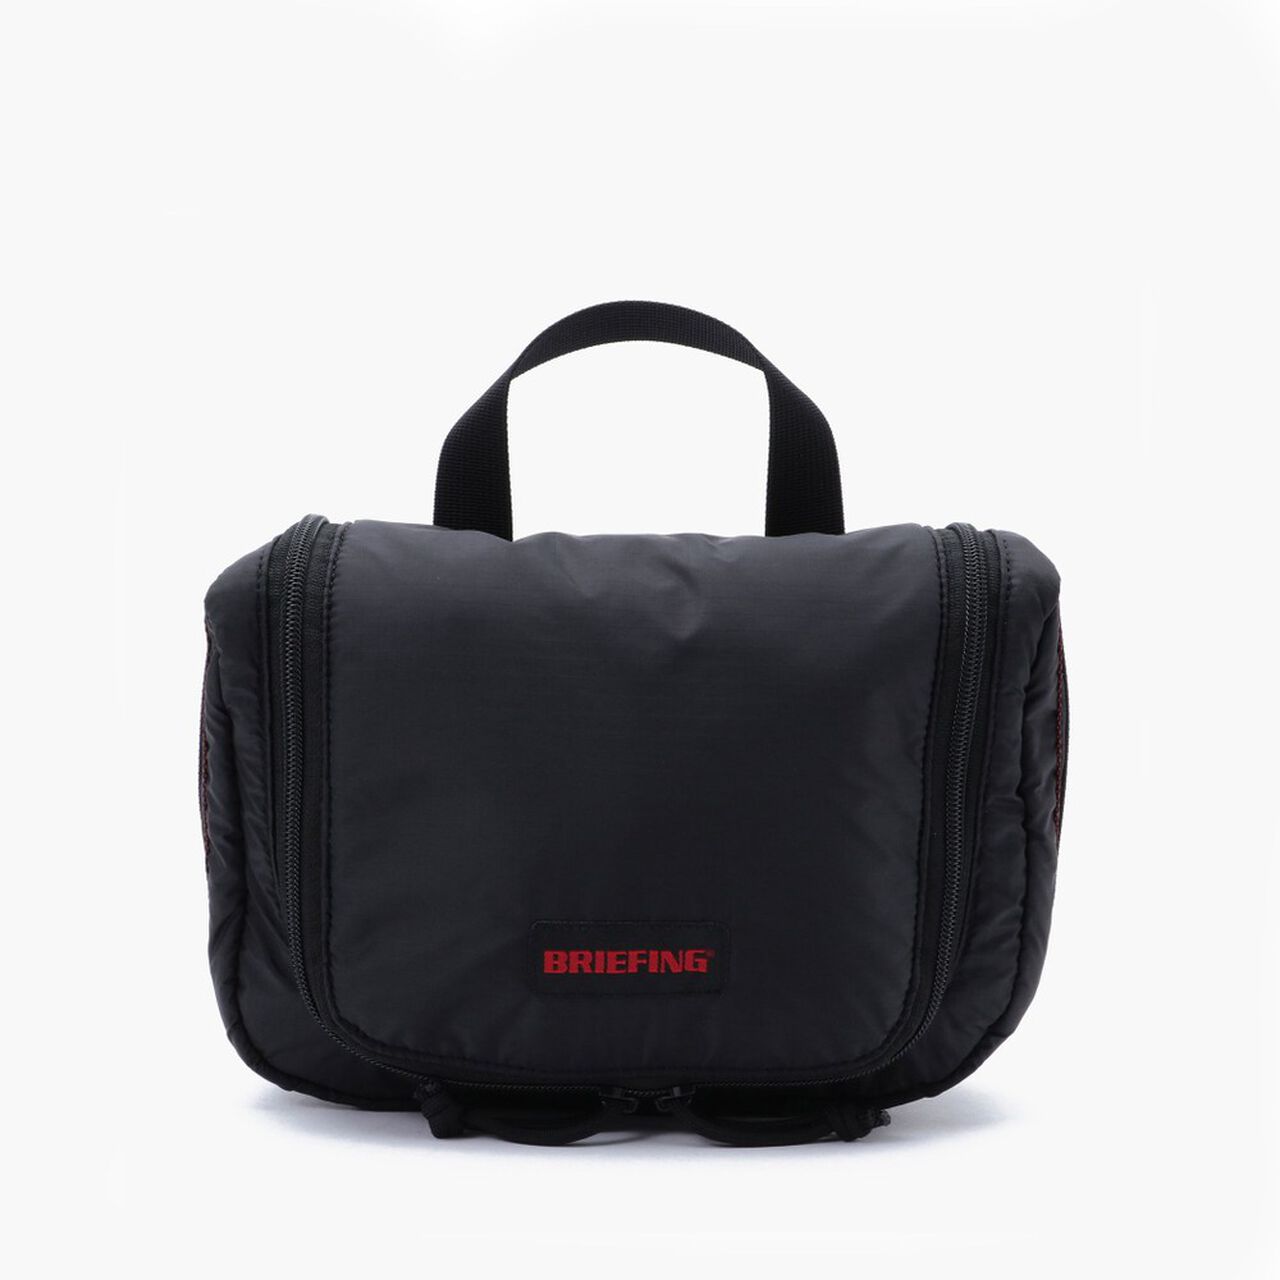 TRIP POUCH,Black, large image number 0